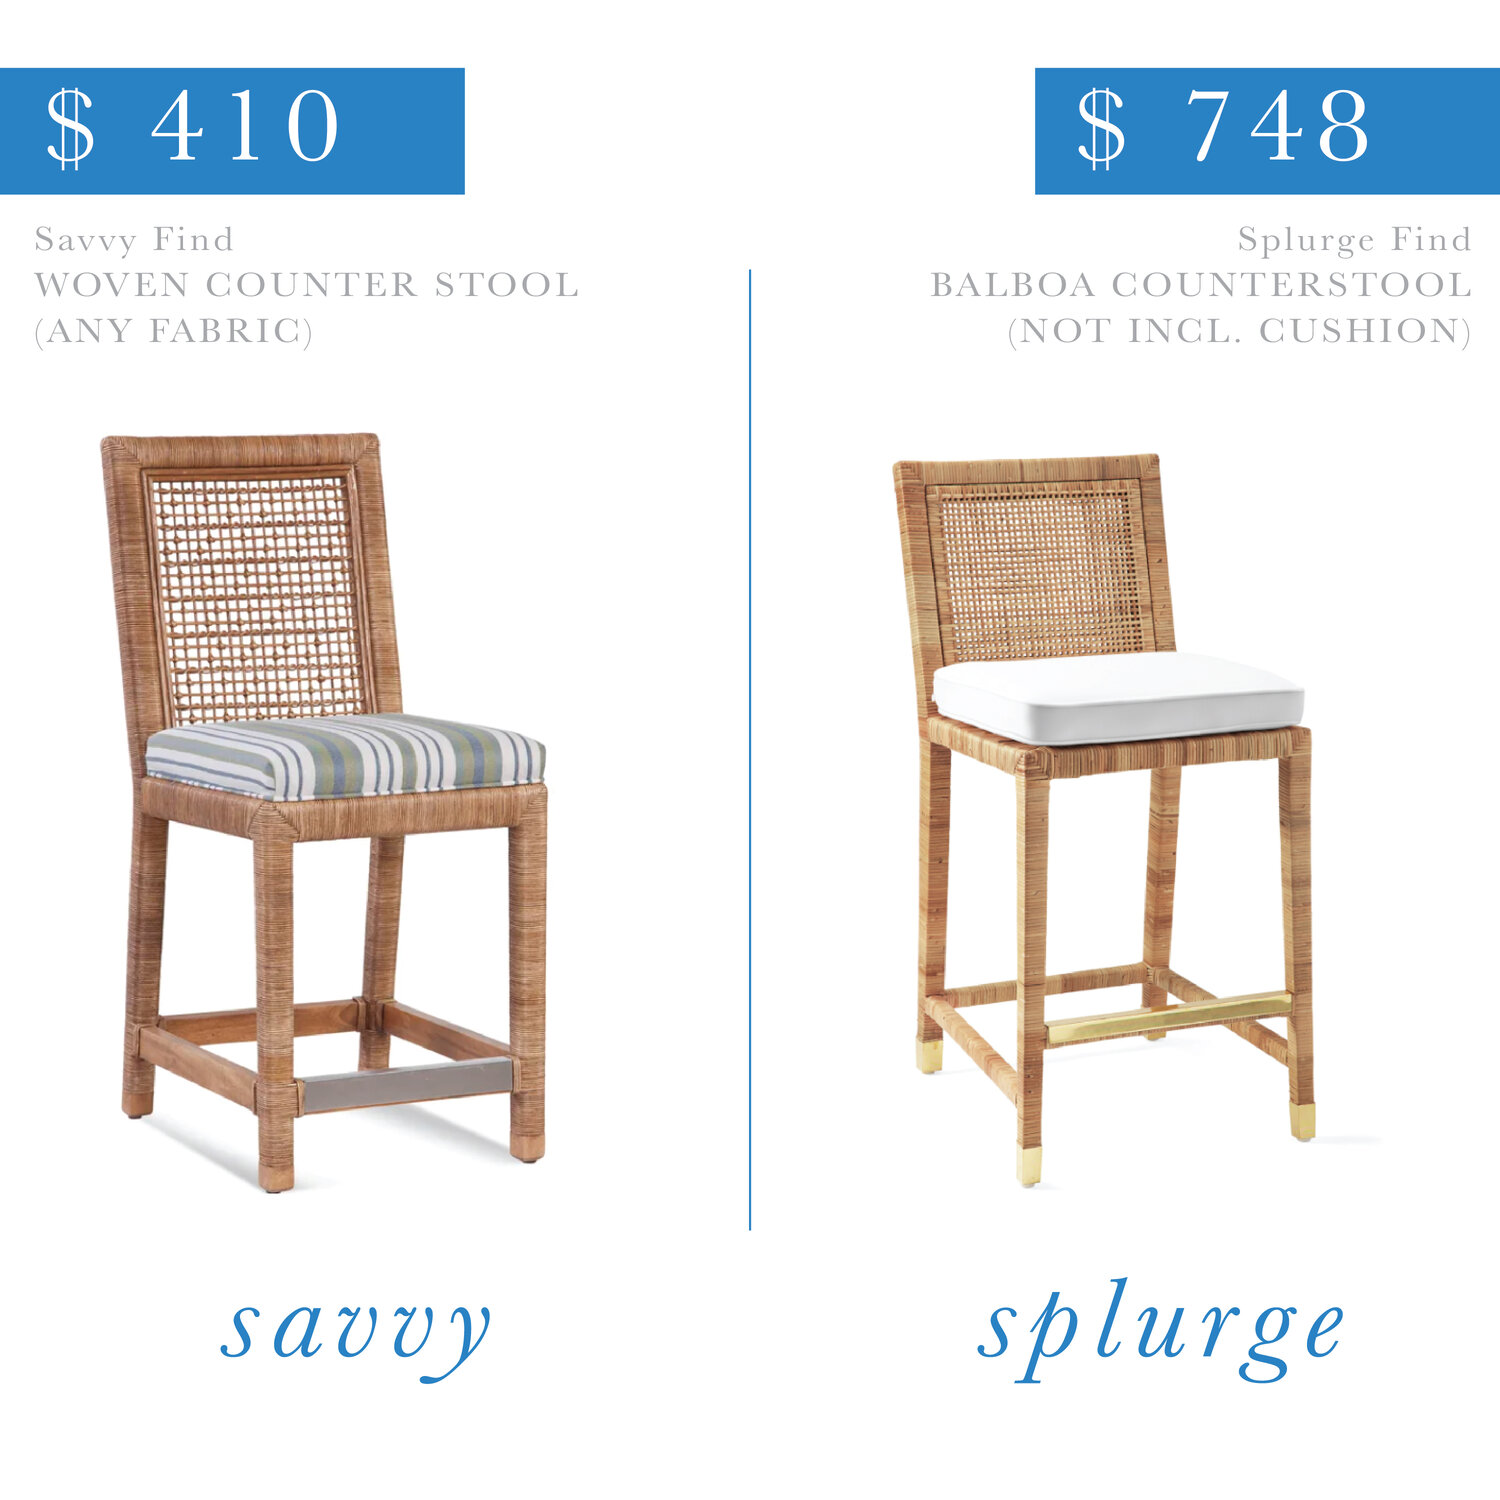 Balboa Counter Stool Serena and Lily Dupe — Follow the Find